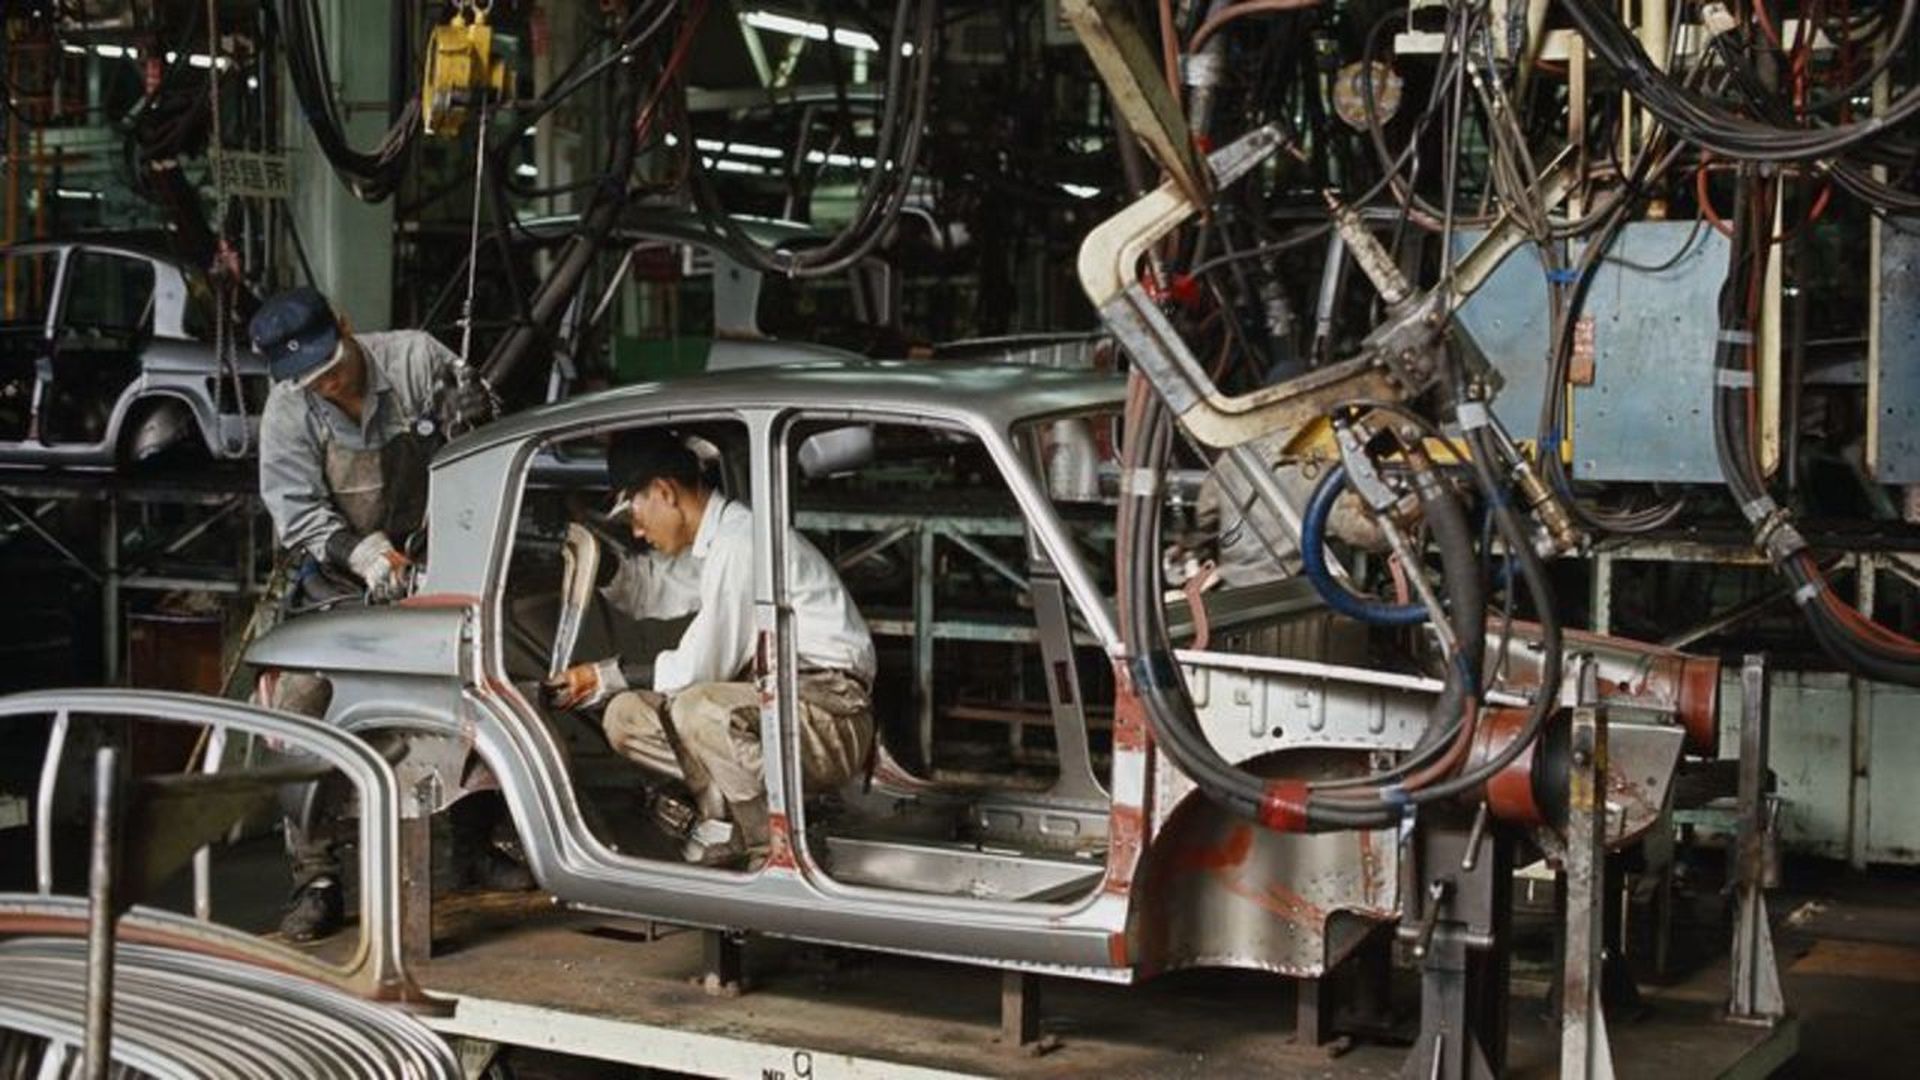 Factory workers assembling a car. Photo: Jerry Cooke/Corbis via Getty Images